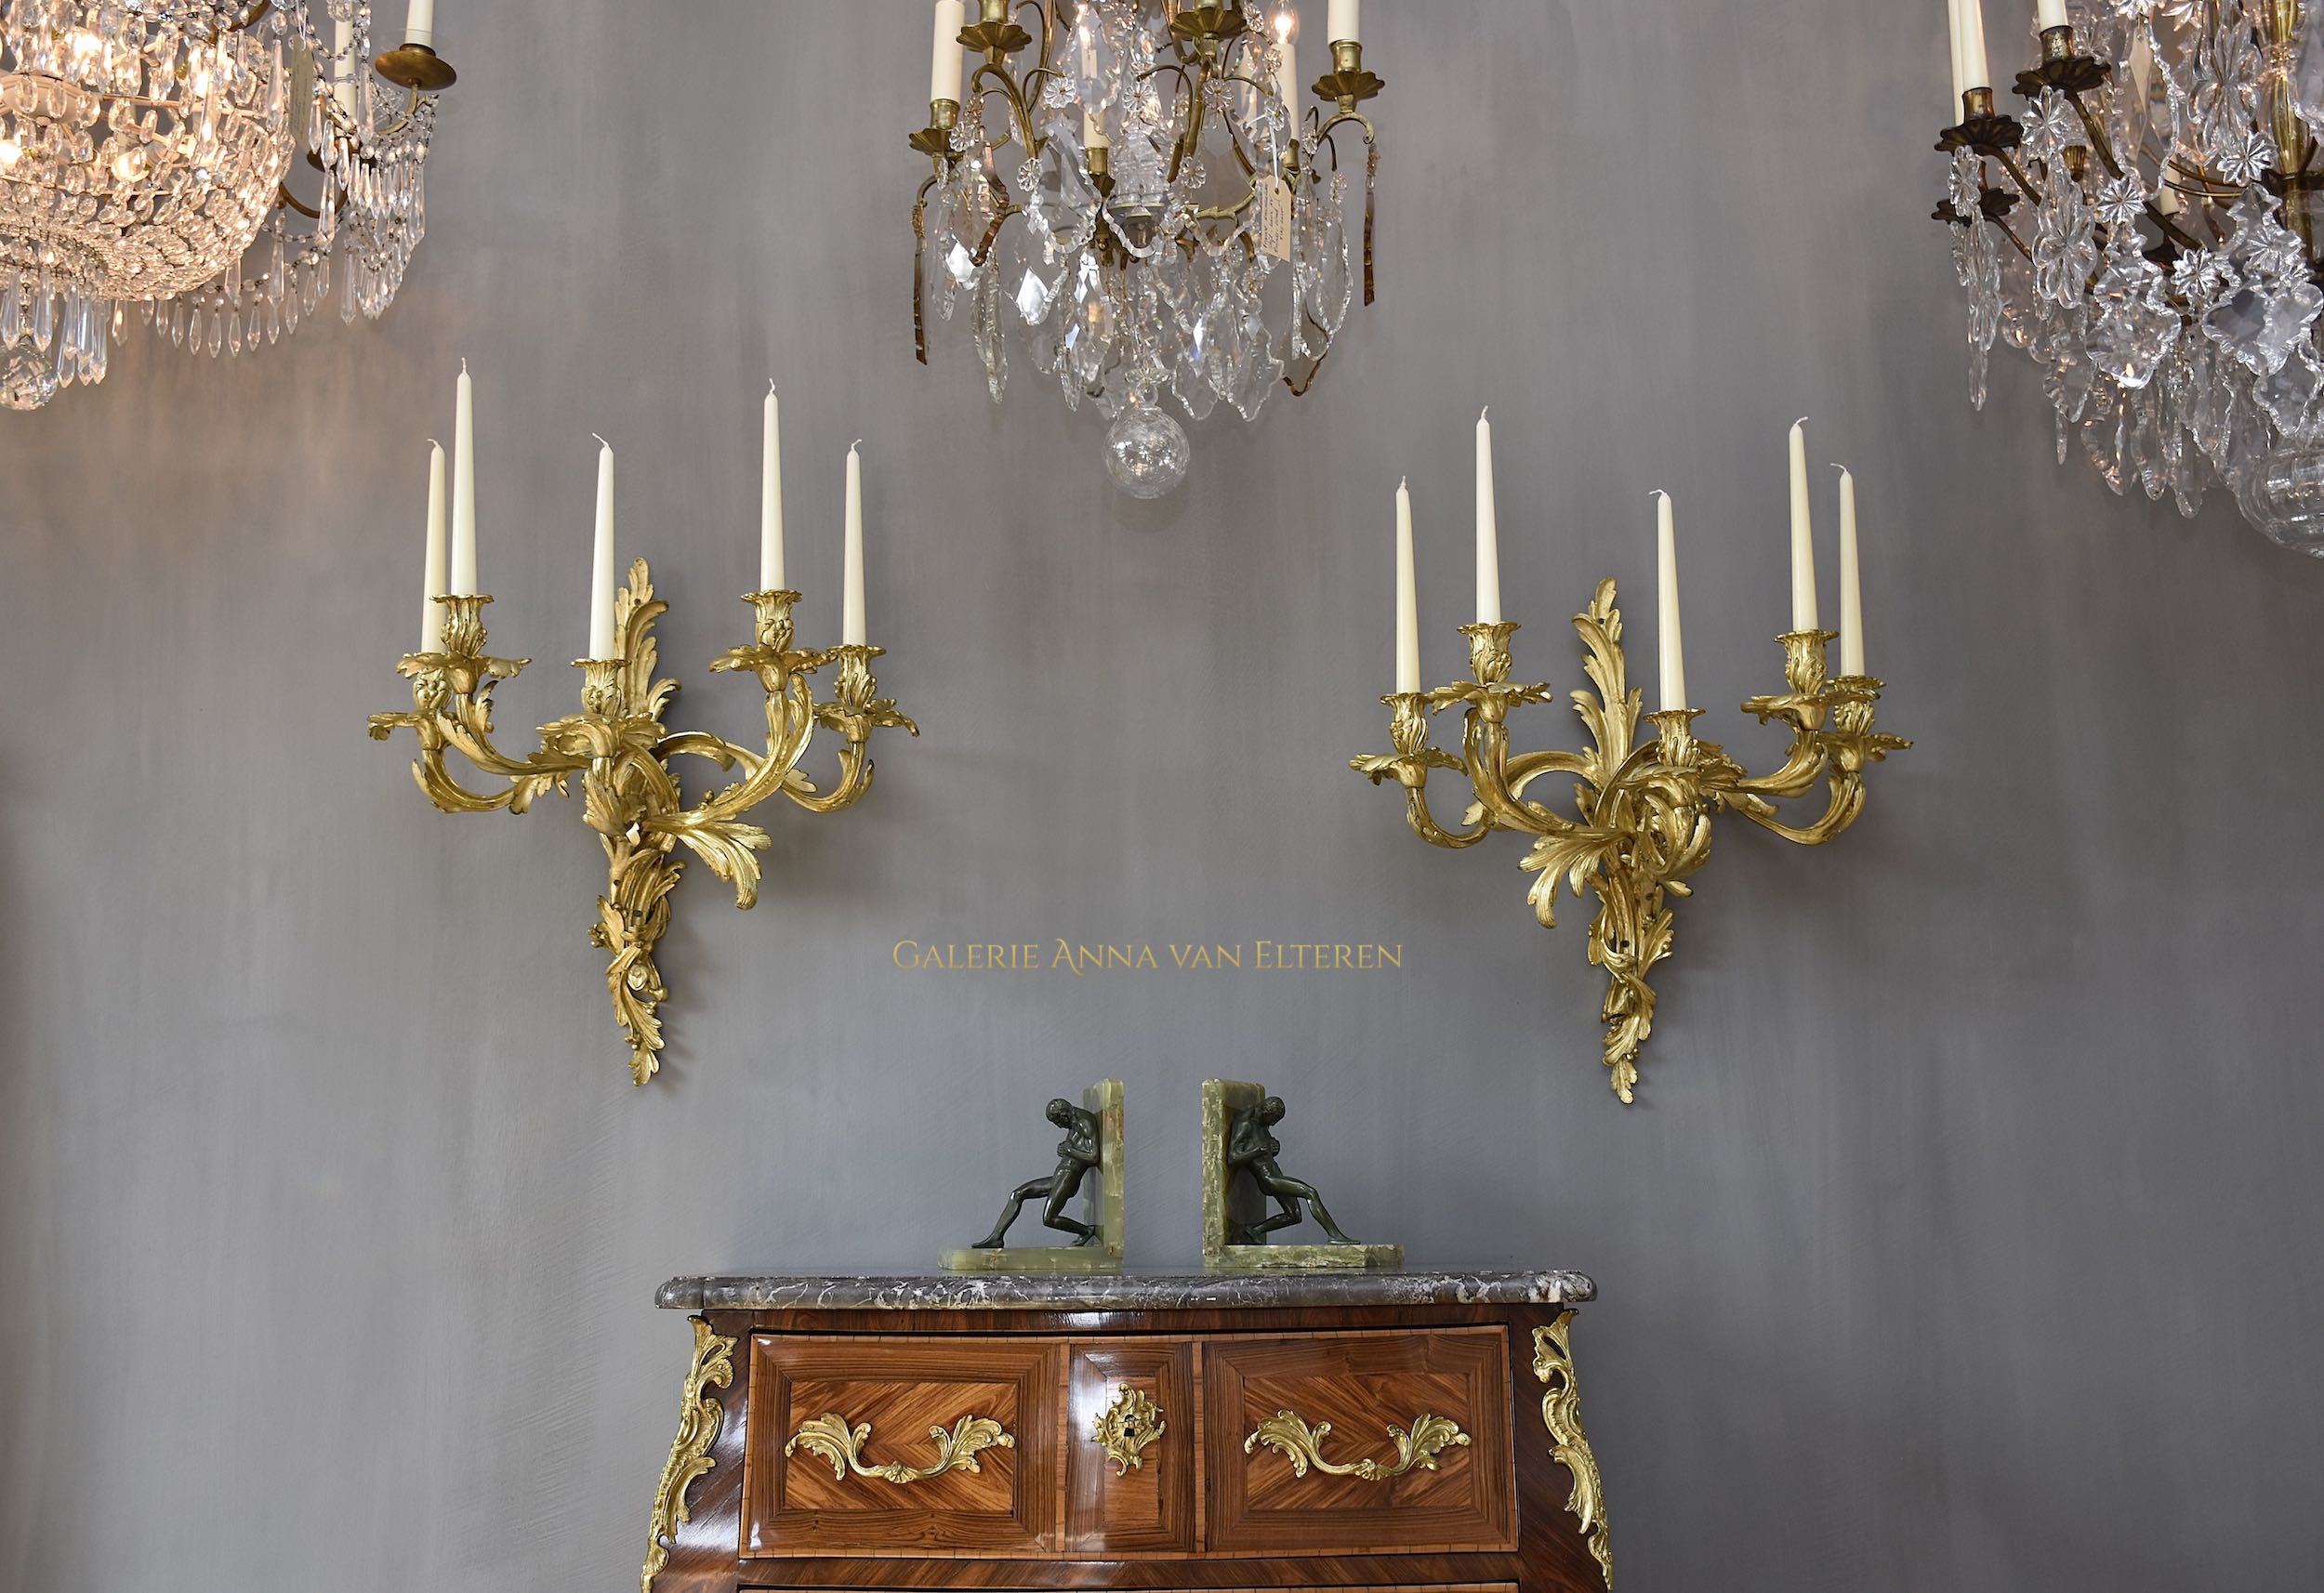 A pair of large gilt bronze wall appliques in the style of Louis XV